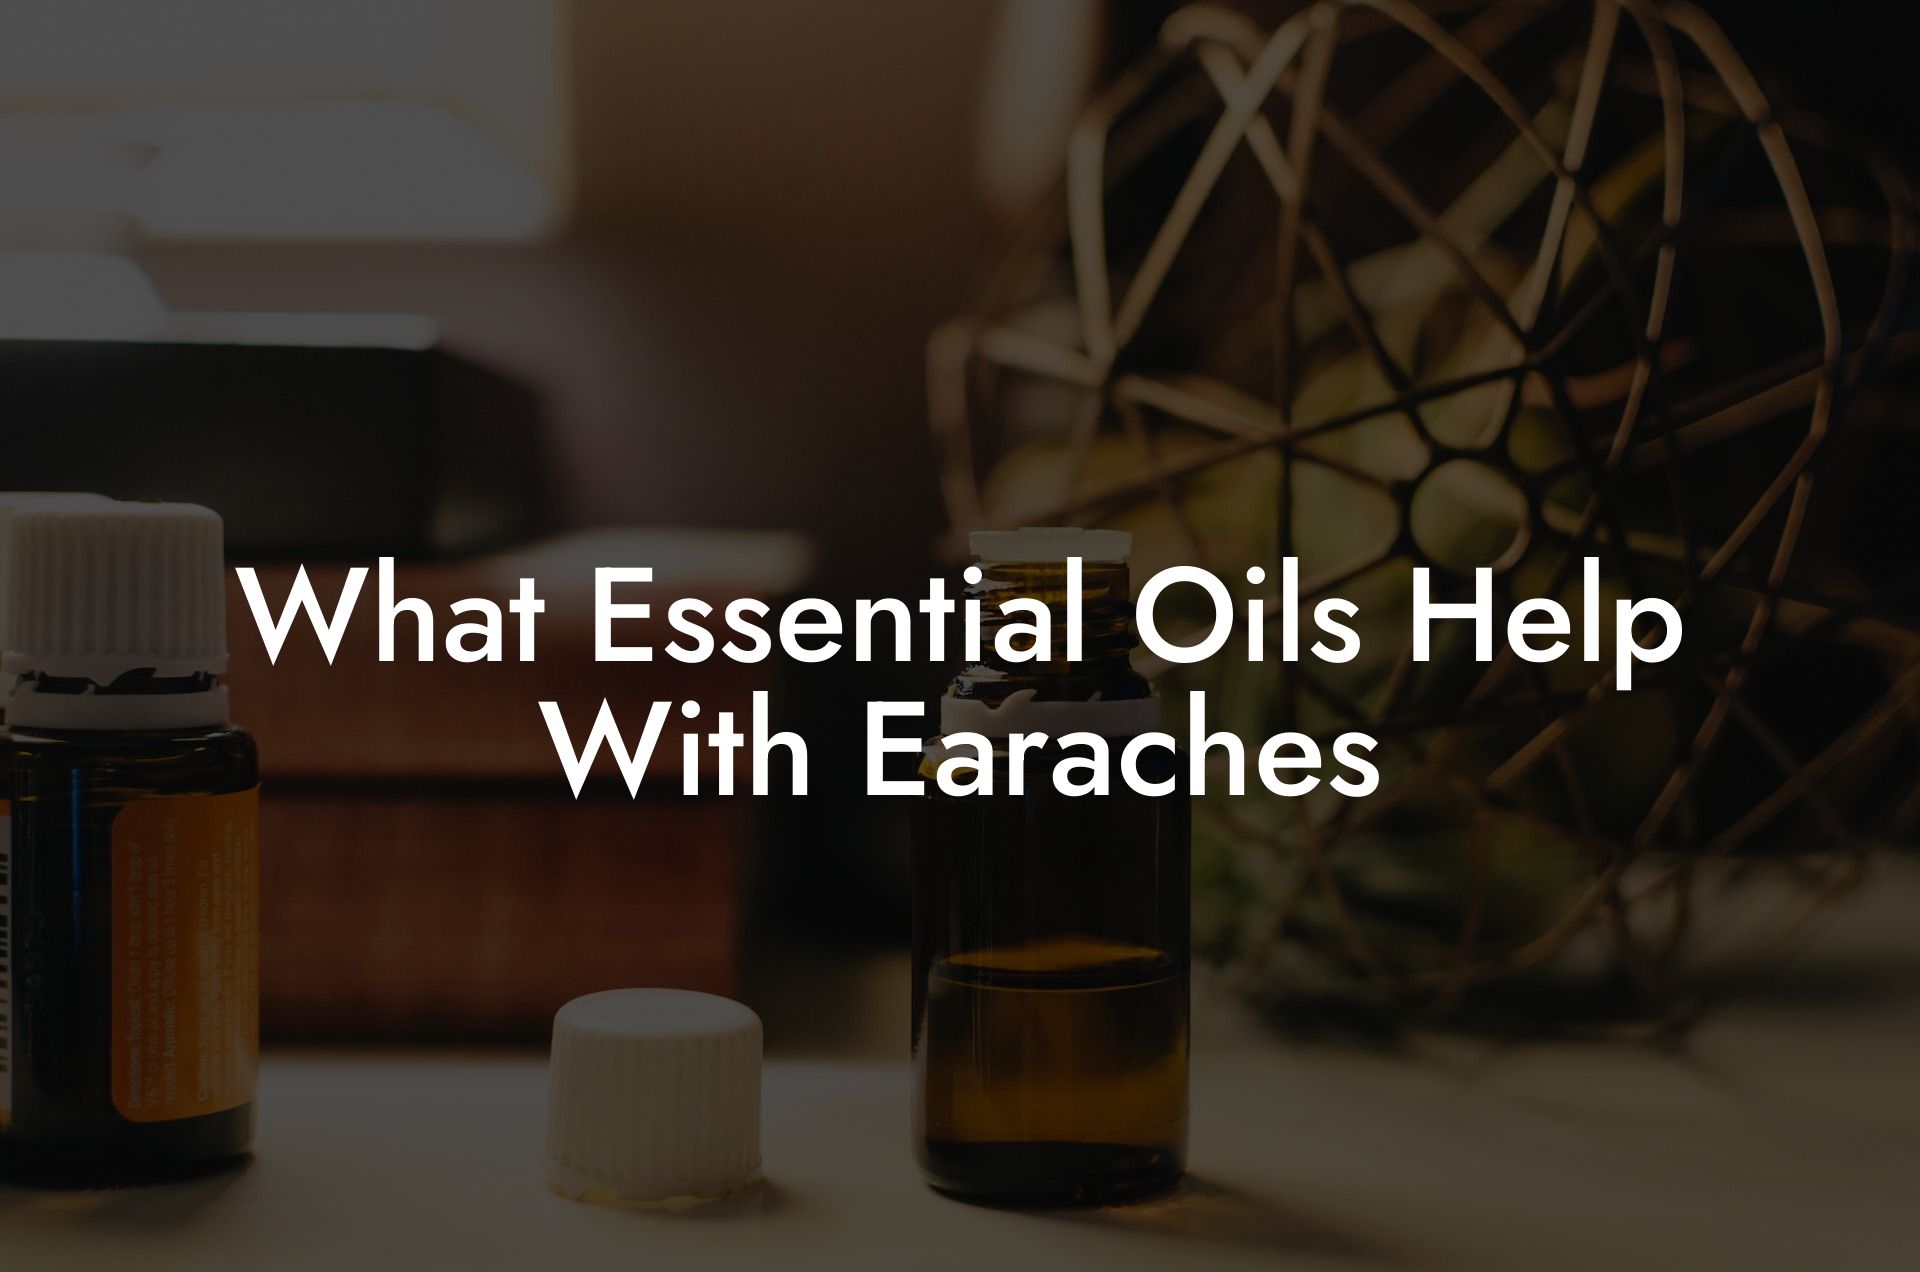 What Essential Oils Help With Earaches